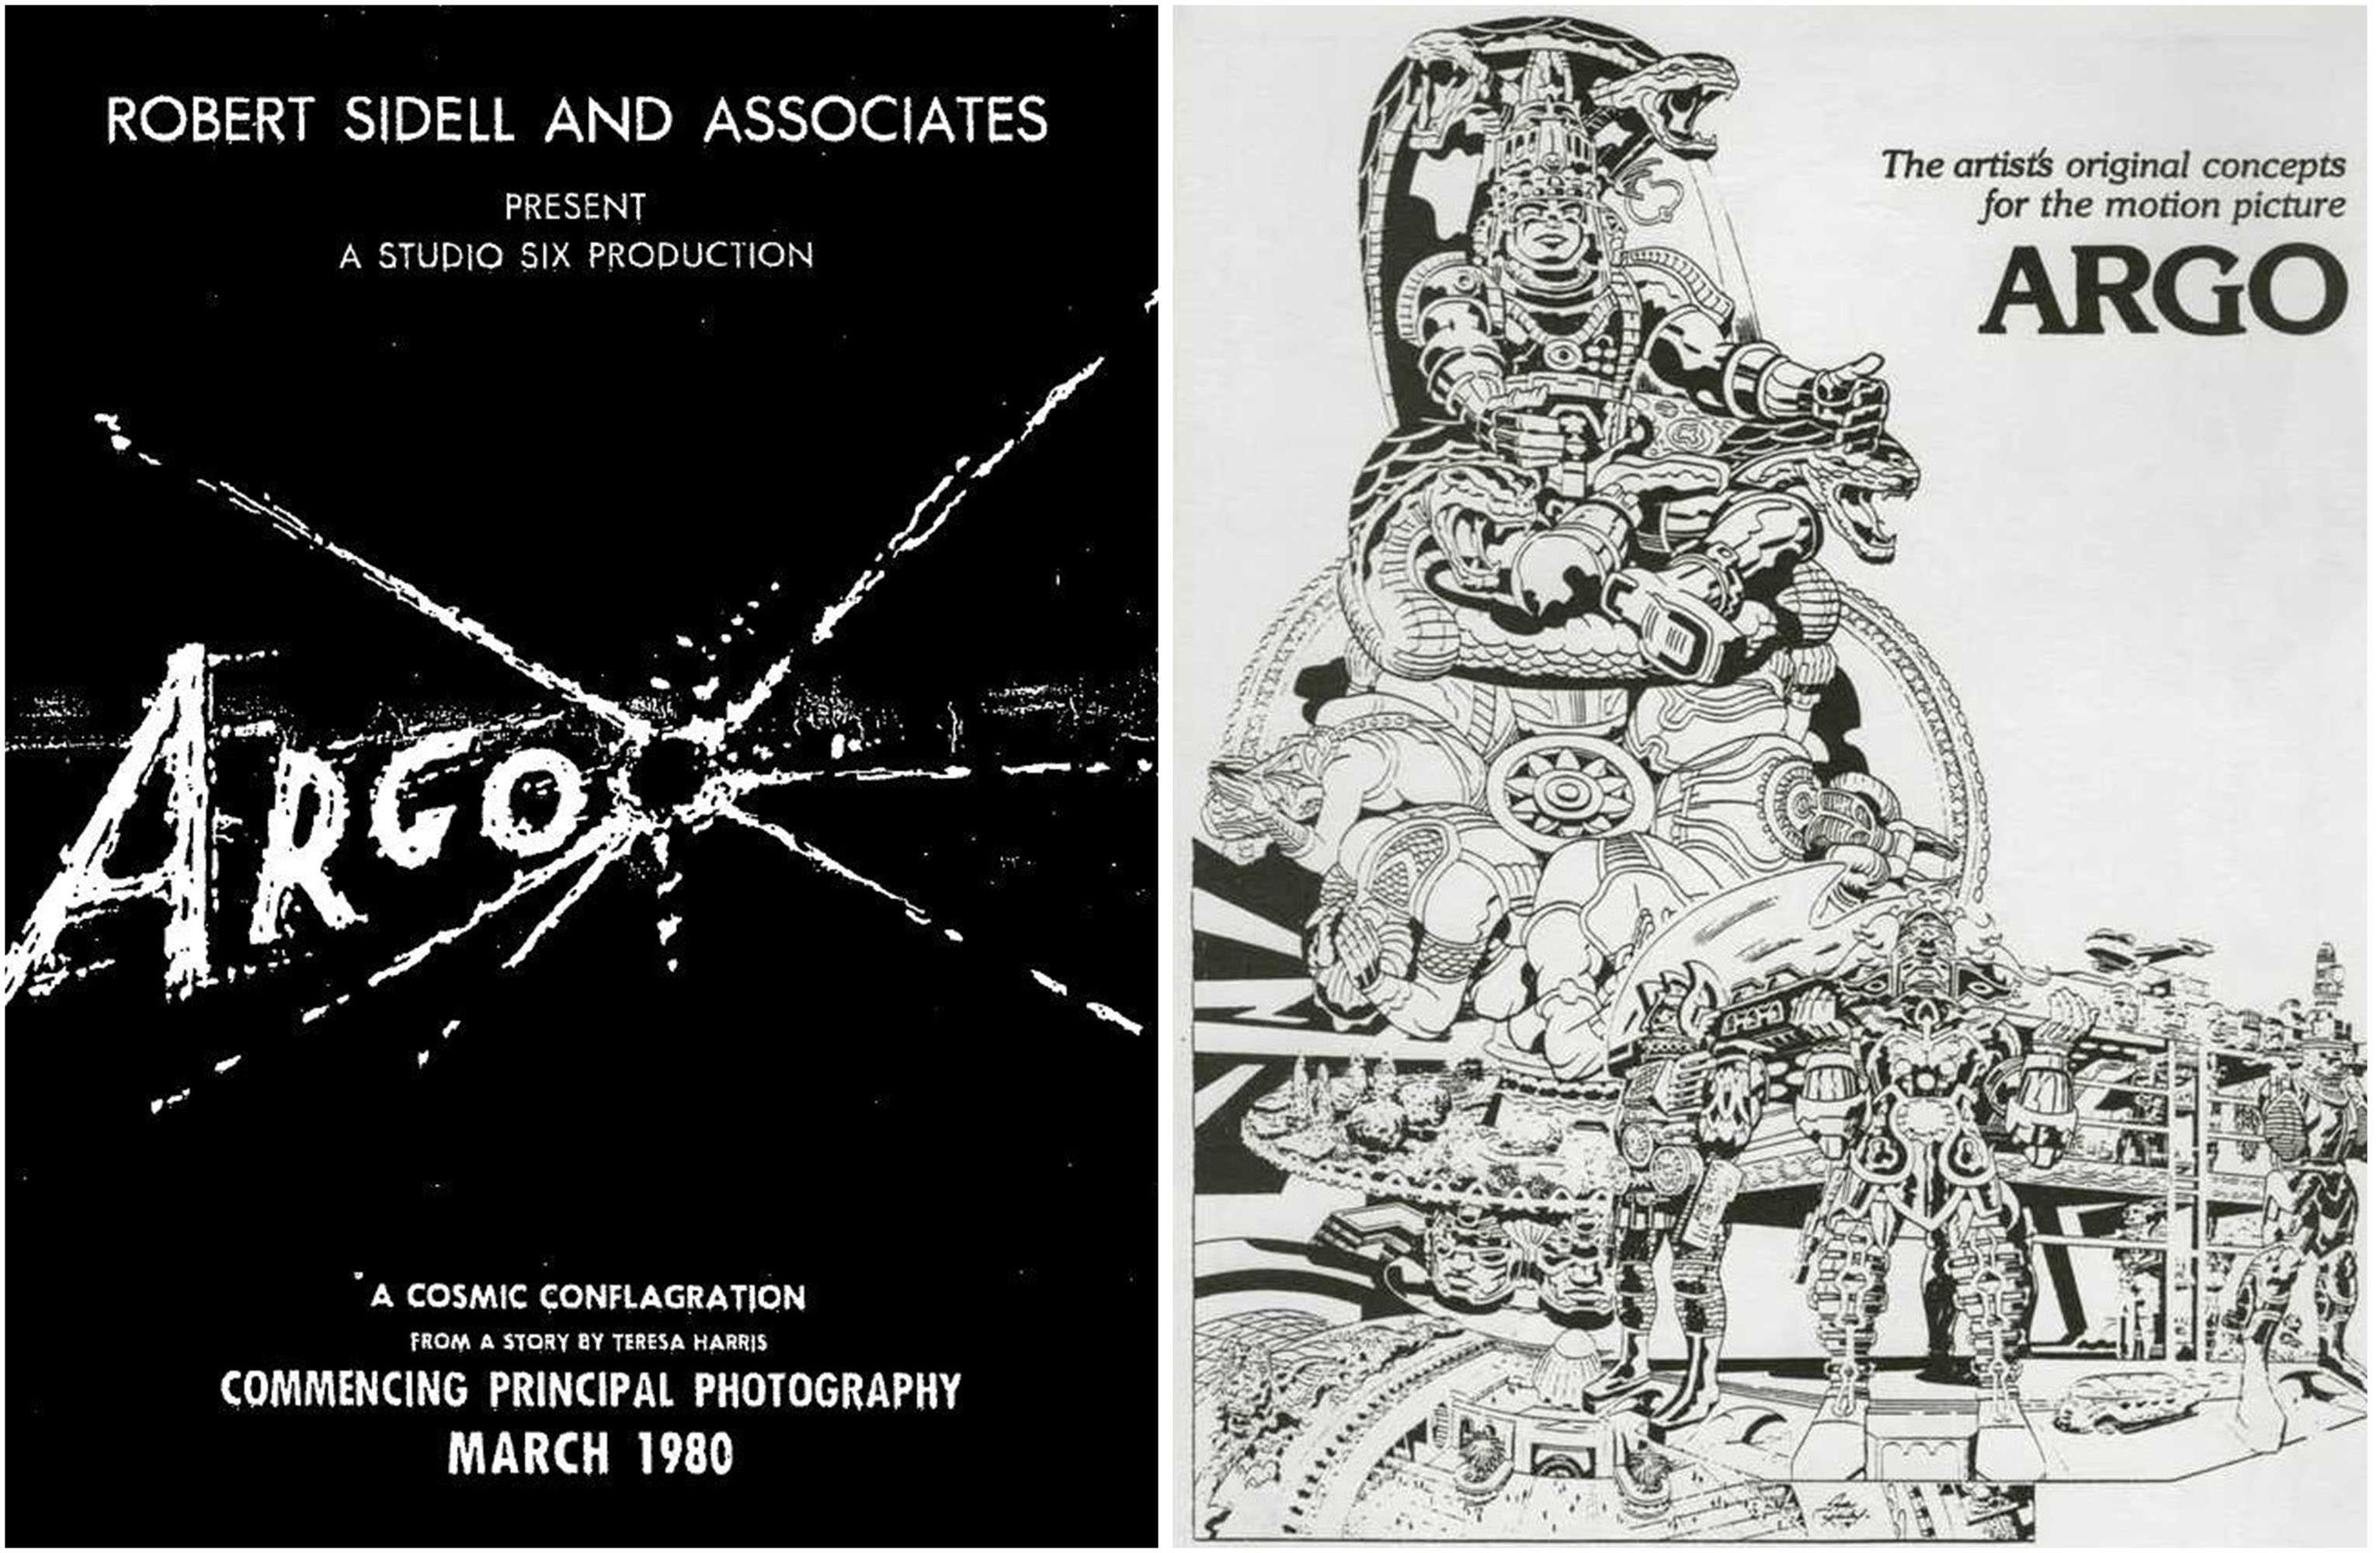 Movie poster for the cover movie Argo on the left. Artist concept adapted for the cover movie Argo on the right.